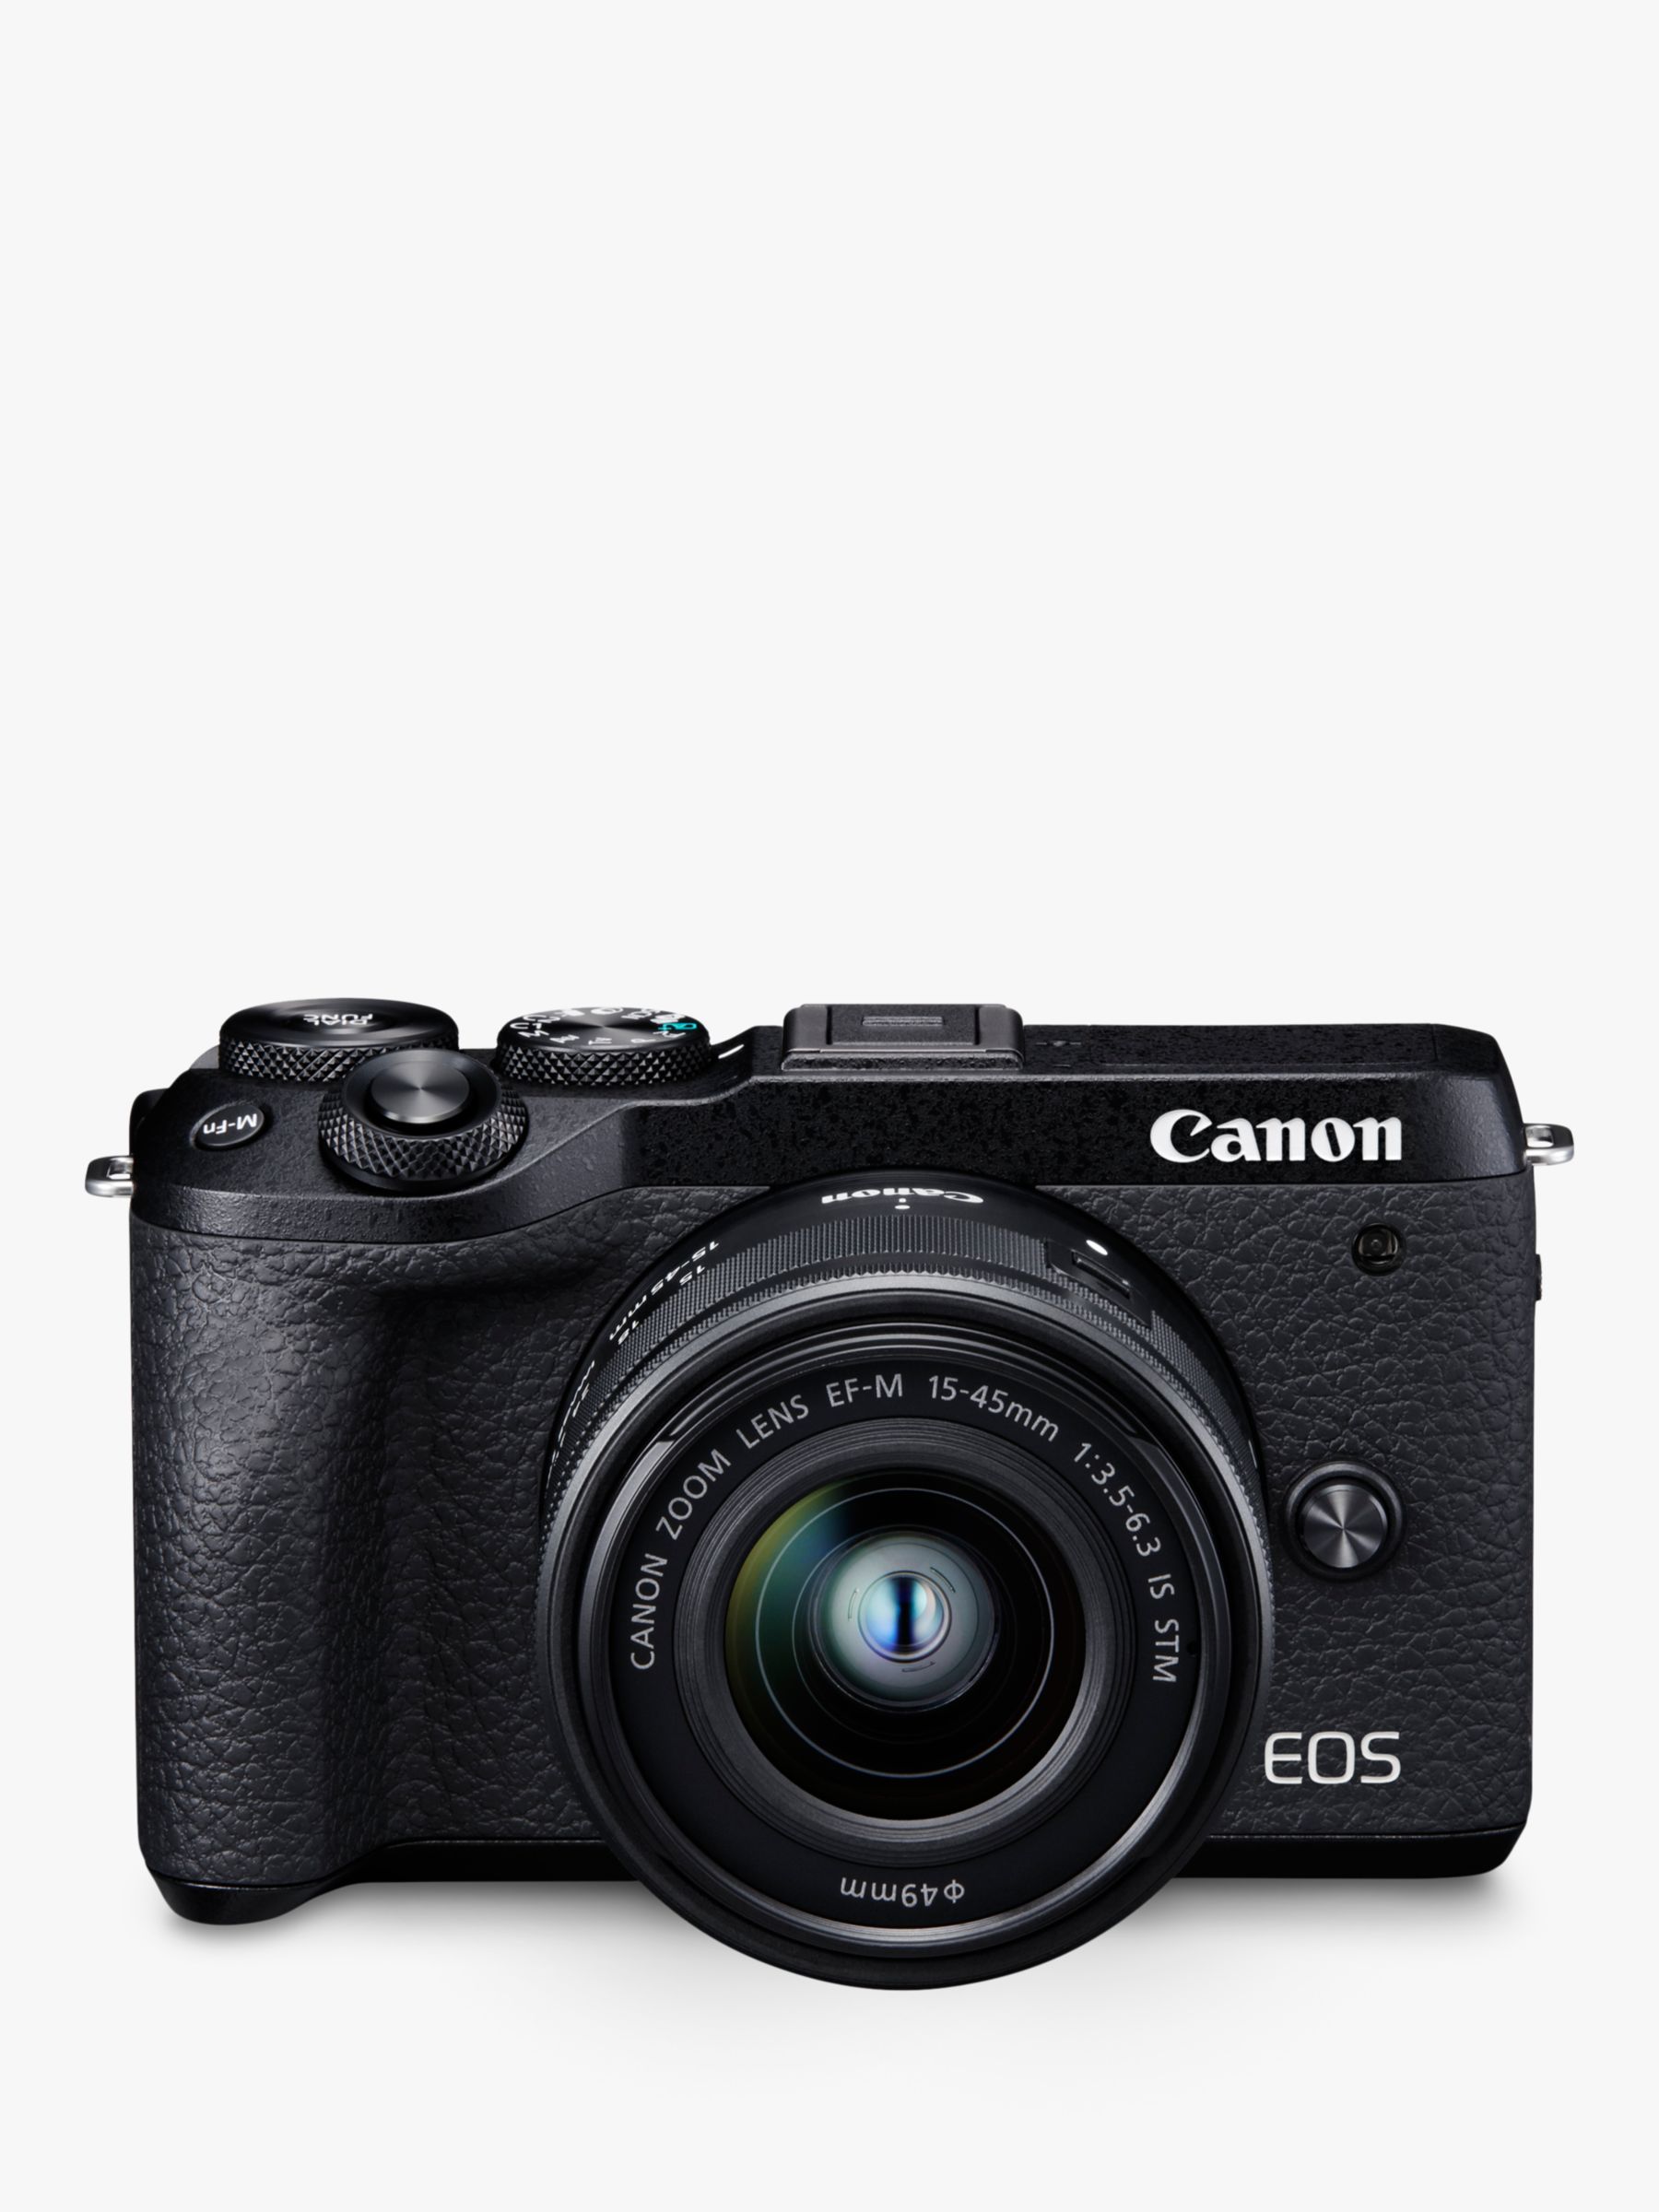 Canon EOS M6 Mark II Compact System Camera with EF-M 15